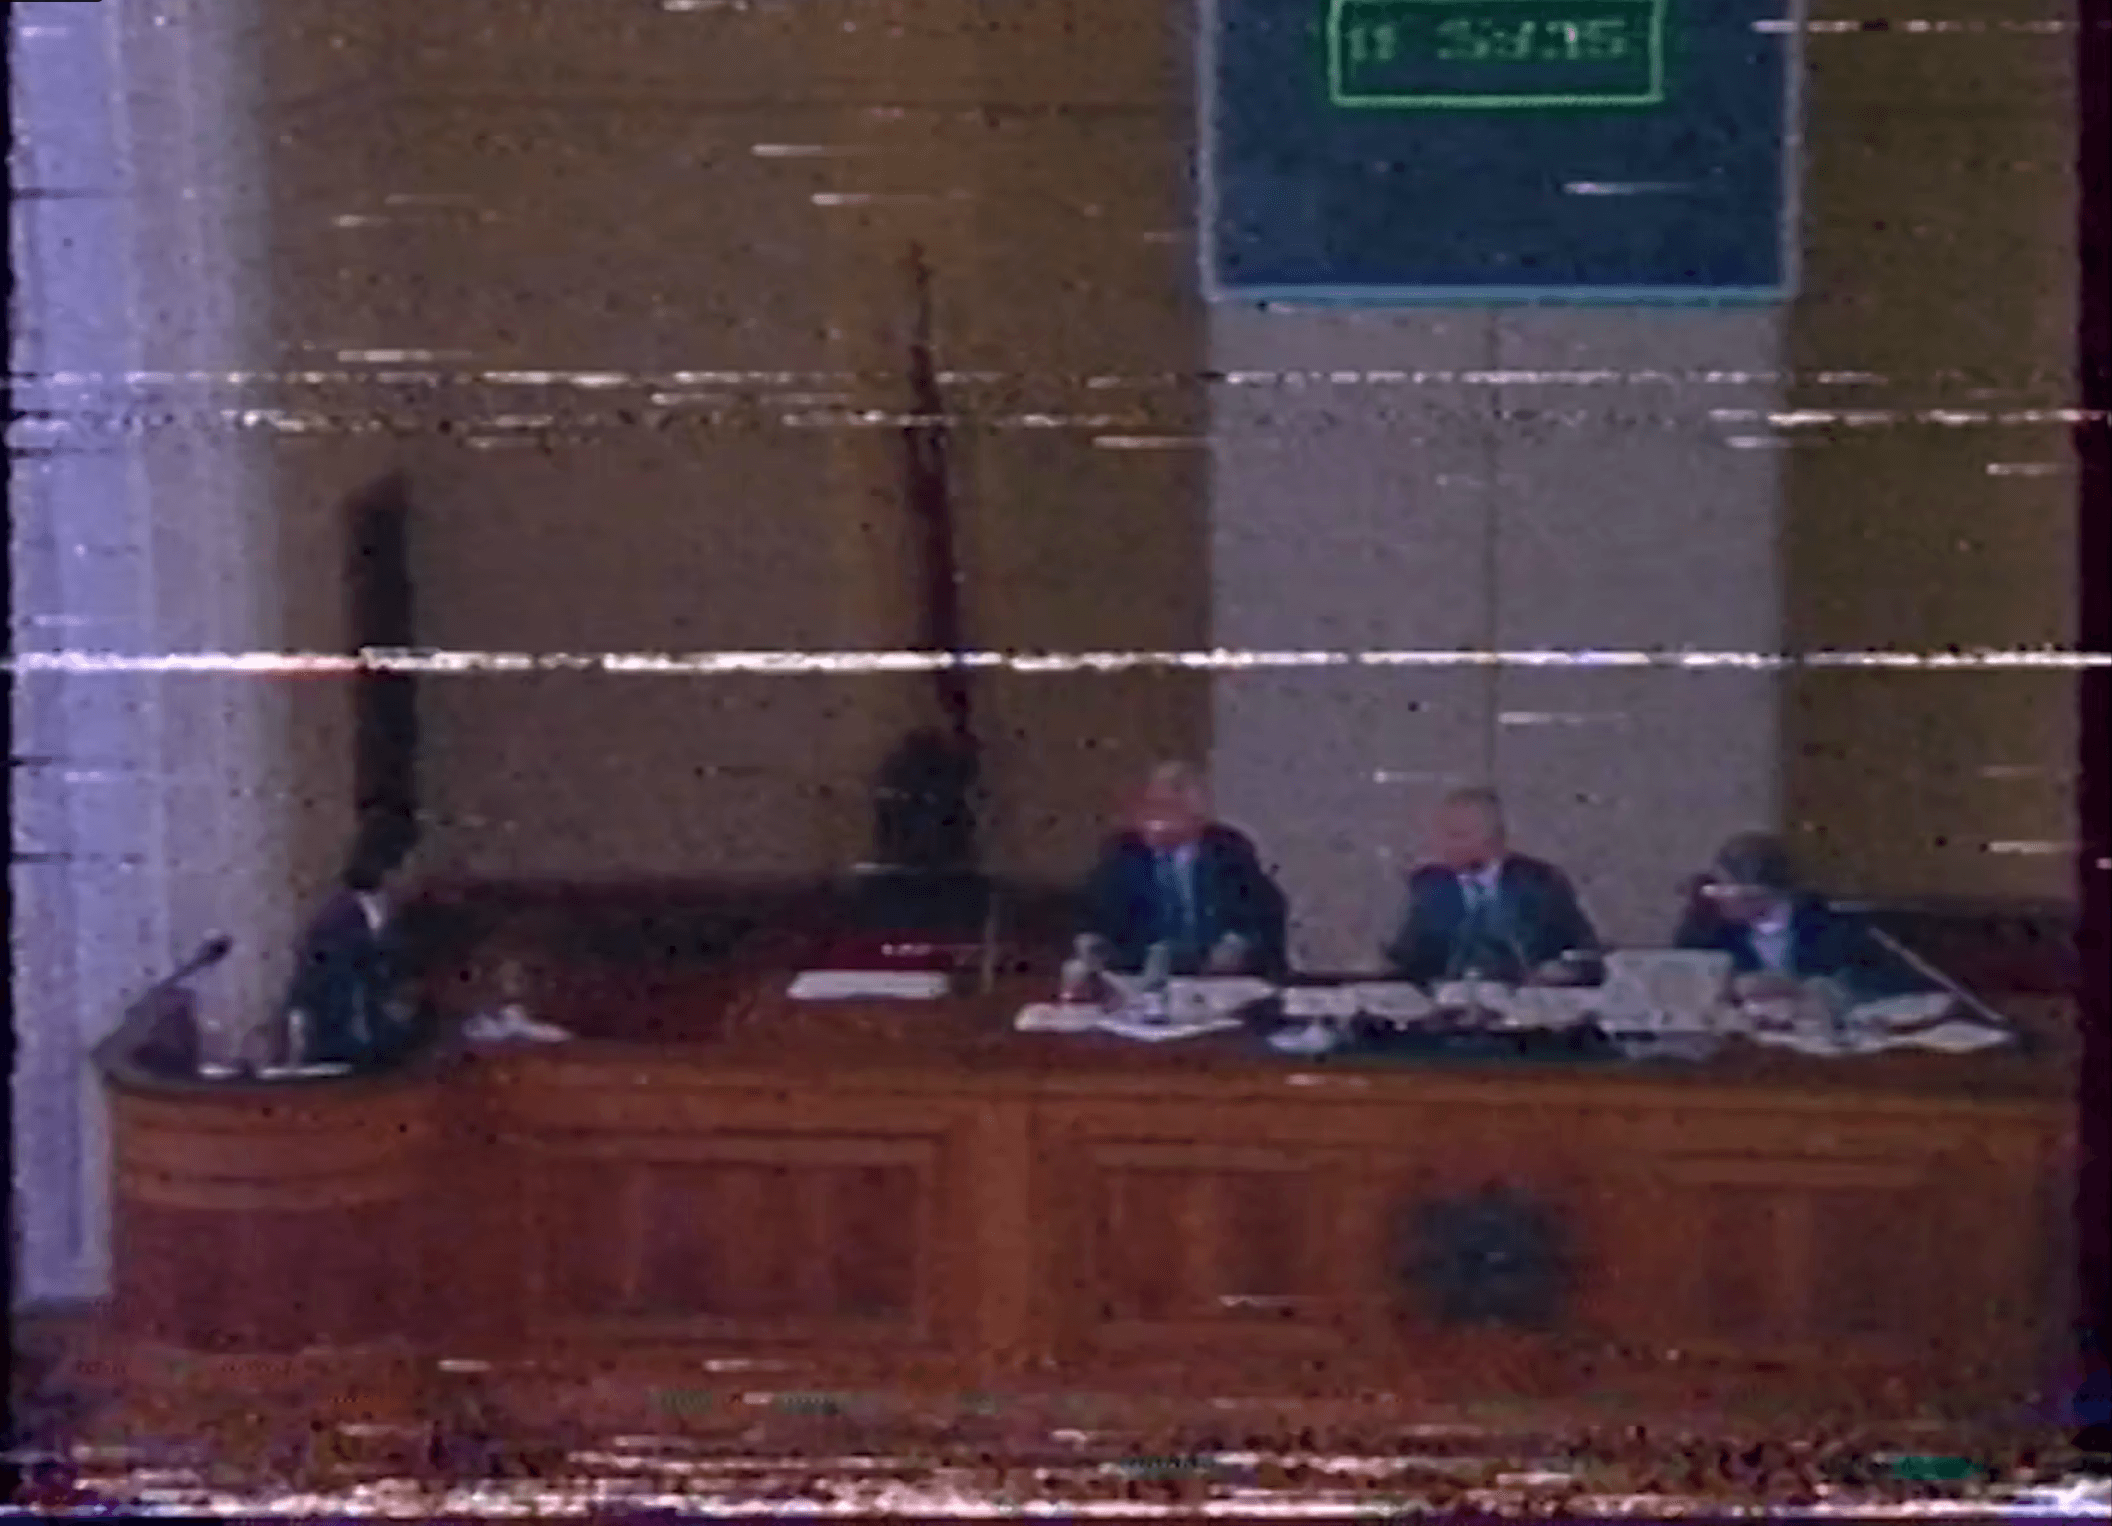 Damaged VHS archive image of four people at the wooden Parliament podium